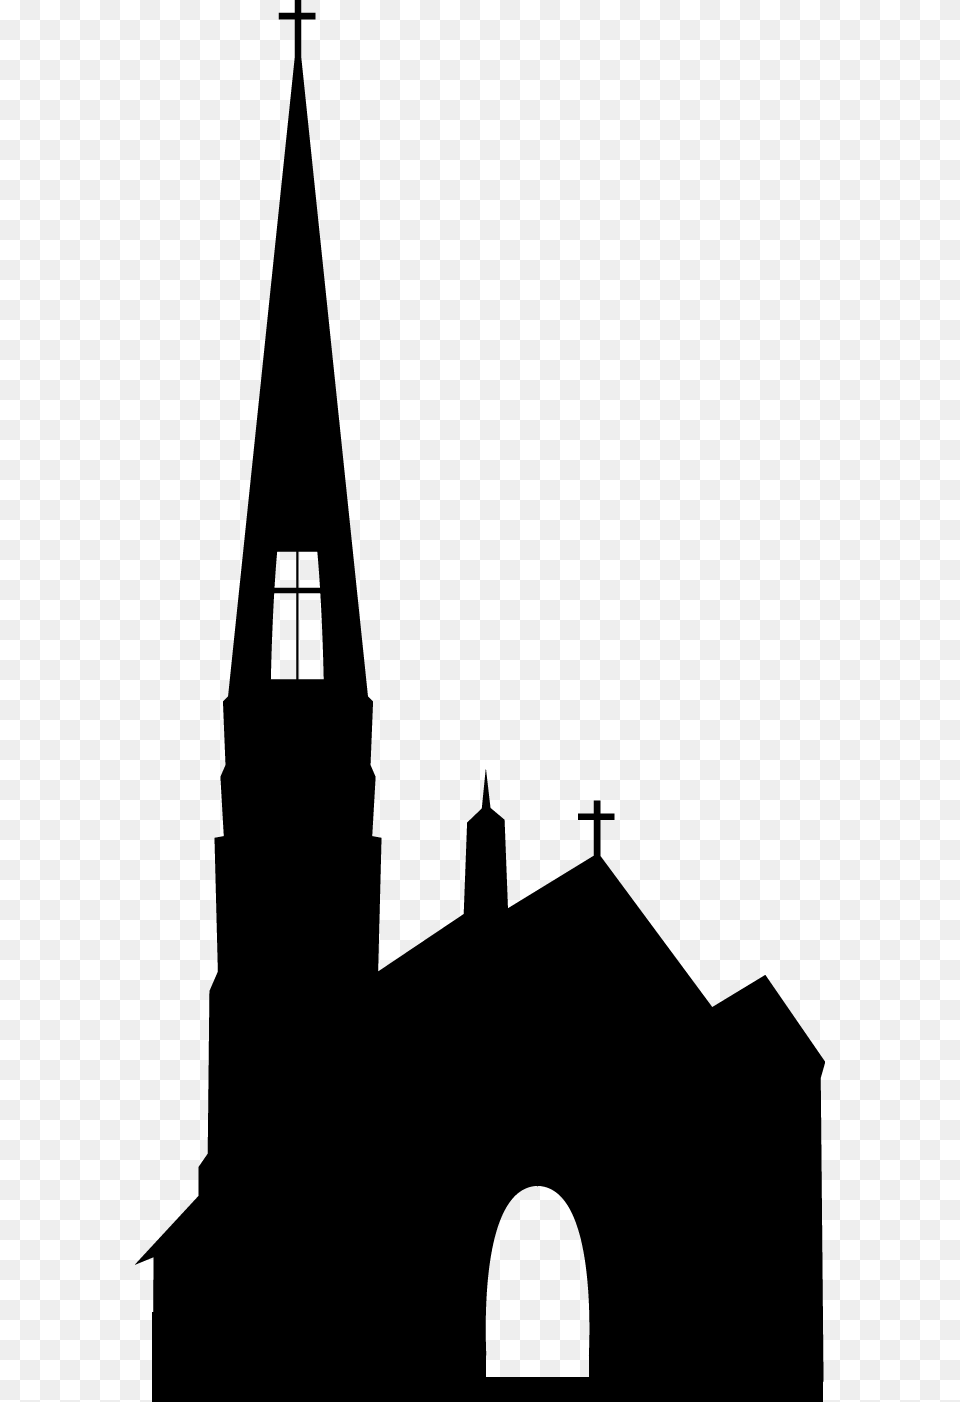 Erqi Memorial Tower Silhouette Church Church Silhouette, Architecture, Spire, Building, Cathedral Free Png